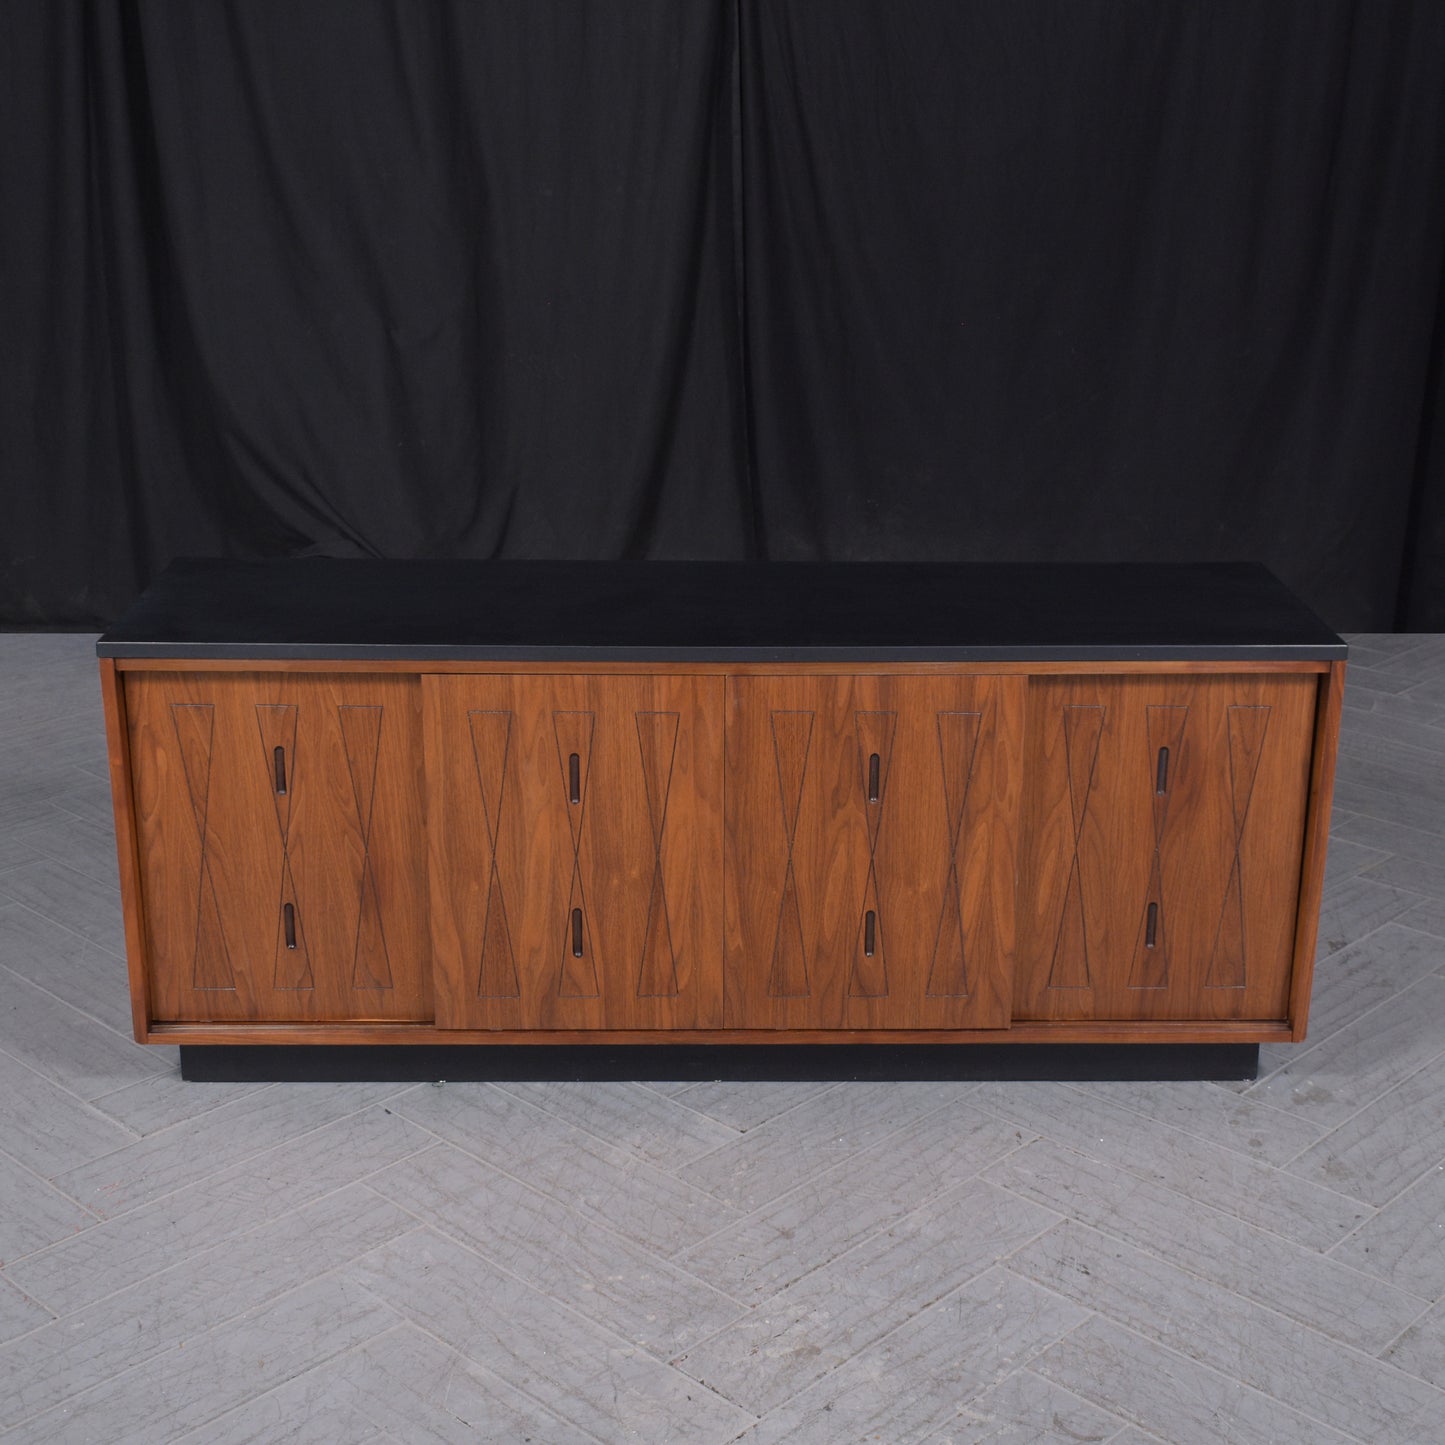 1960s Restored Mid-Century Walnut Credenza with Sliding Doors and Shelves